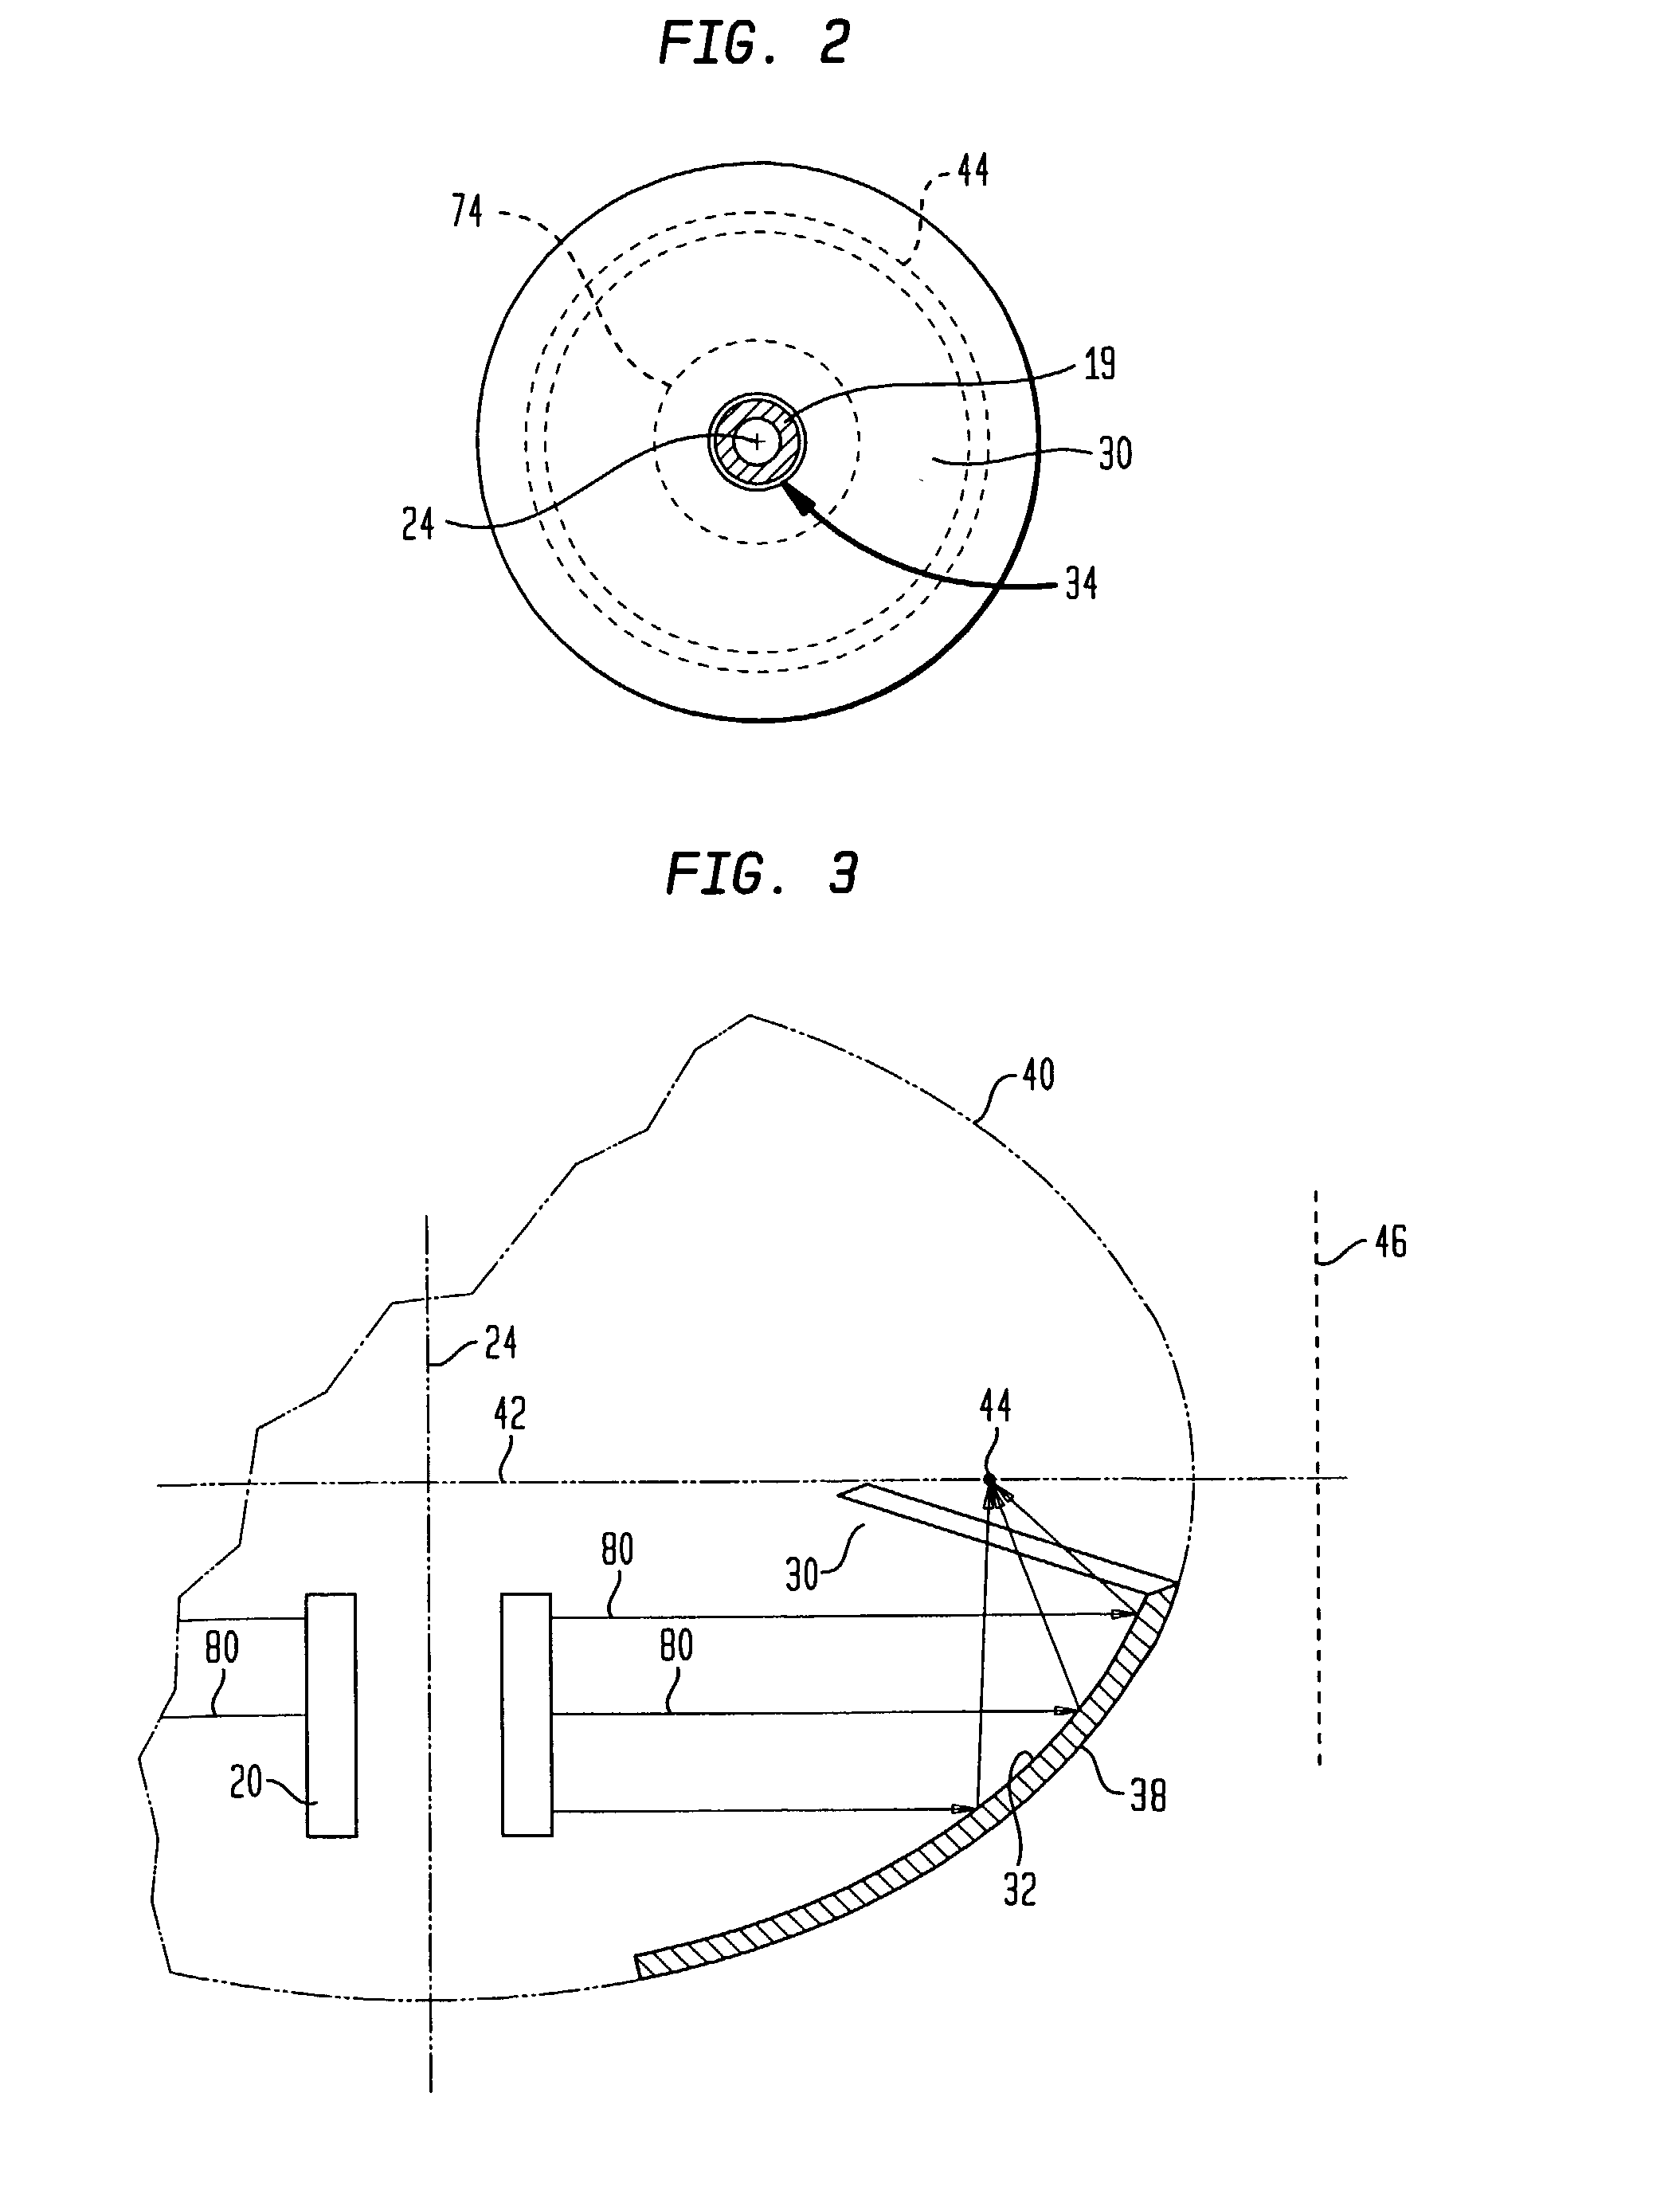 Thermal treatment methods and apparatus with focused energy application